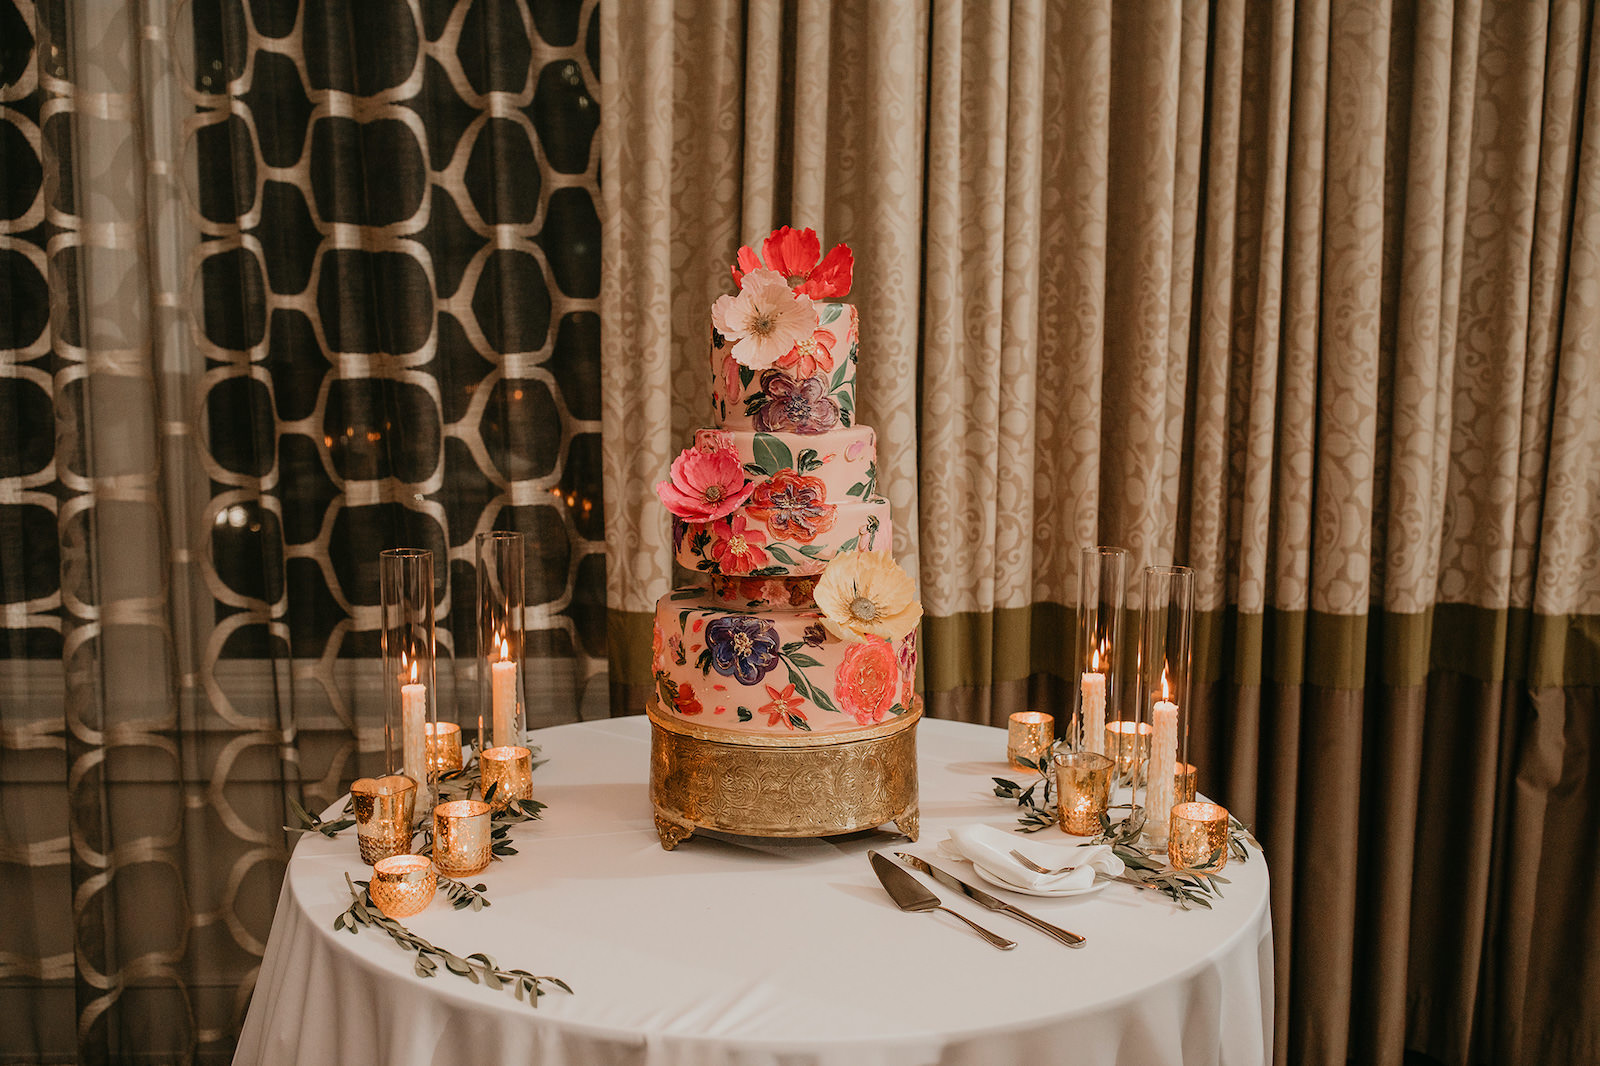 Wedding Cake Art | Painted Colorful Watercolor Floral 5 Tier Wedding Cake with Sugar Flower Poppies by Tampa Cake Bakery The Artistic Whisk | Wedding Cake Table with Gold Votives and Taper Candles